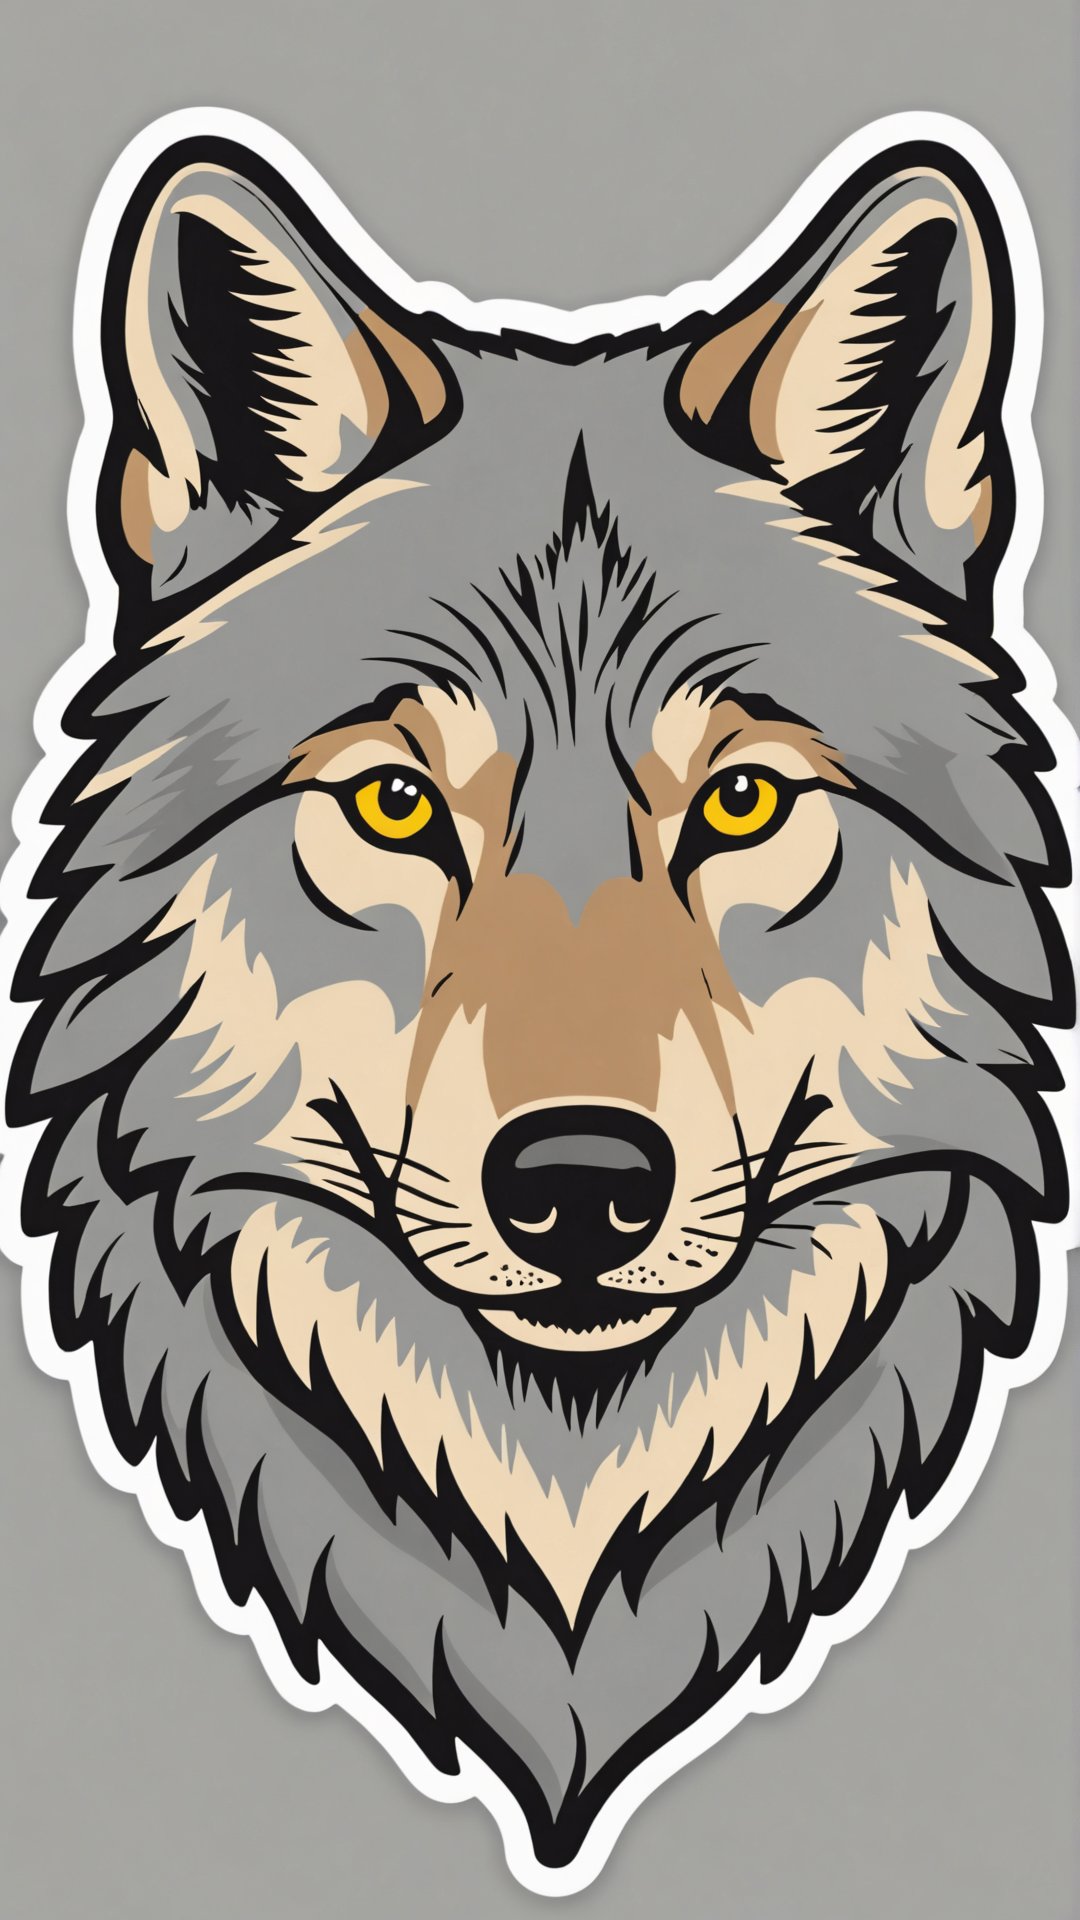 sticker : wolf, pencil style, grey, simple background